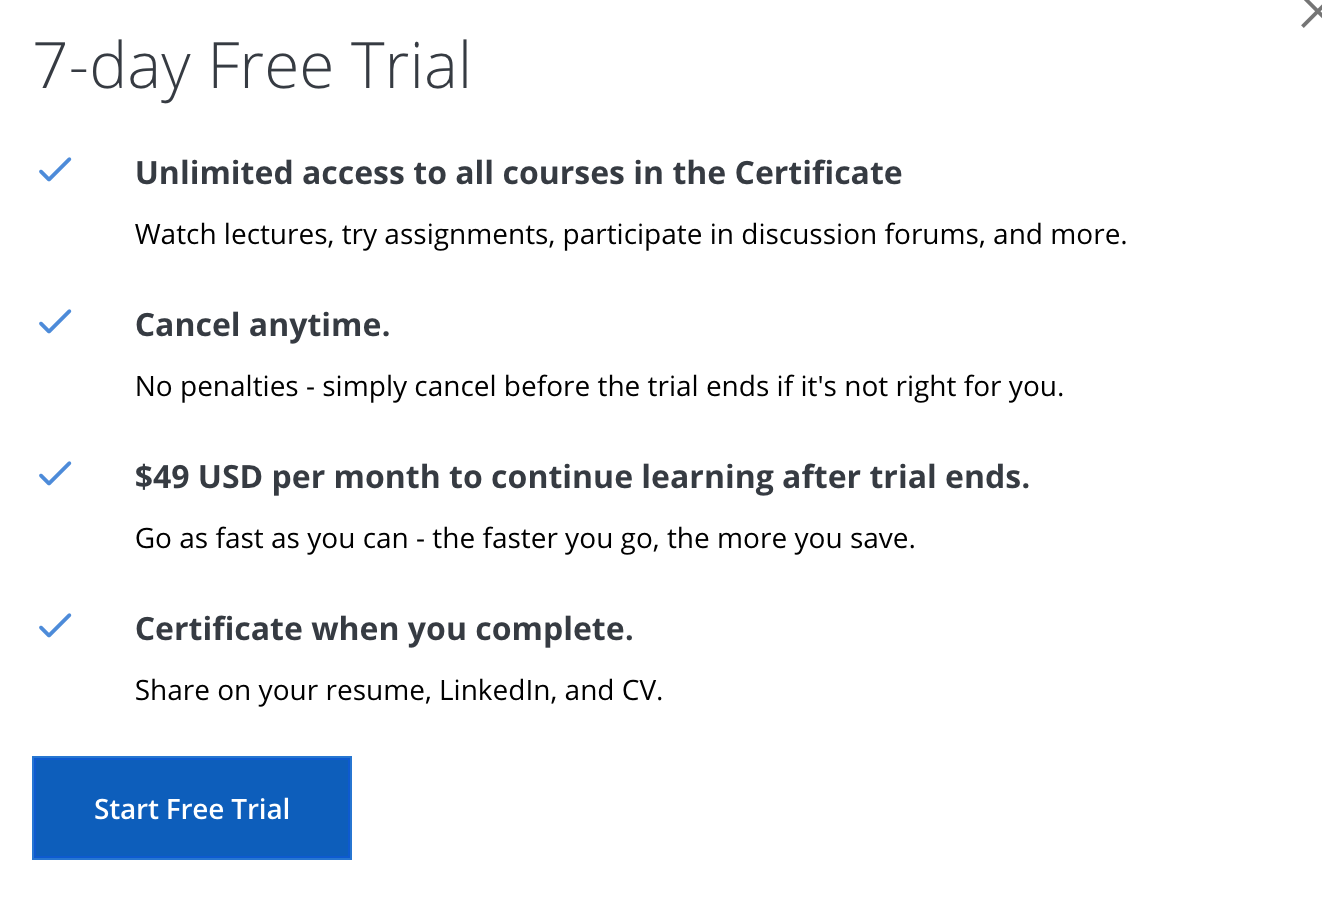 7-day free trial on Coursera